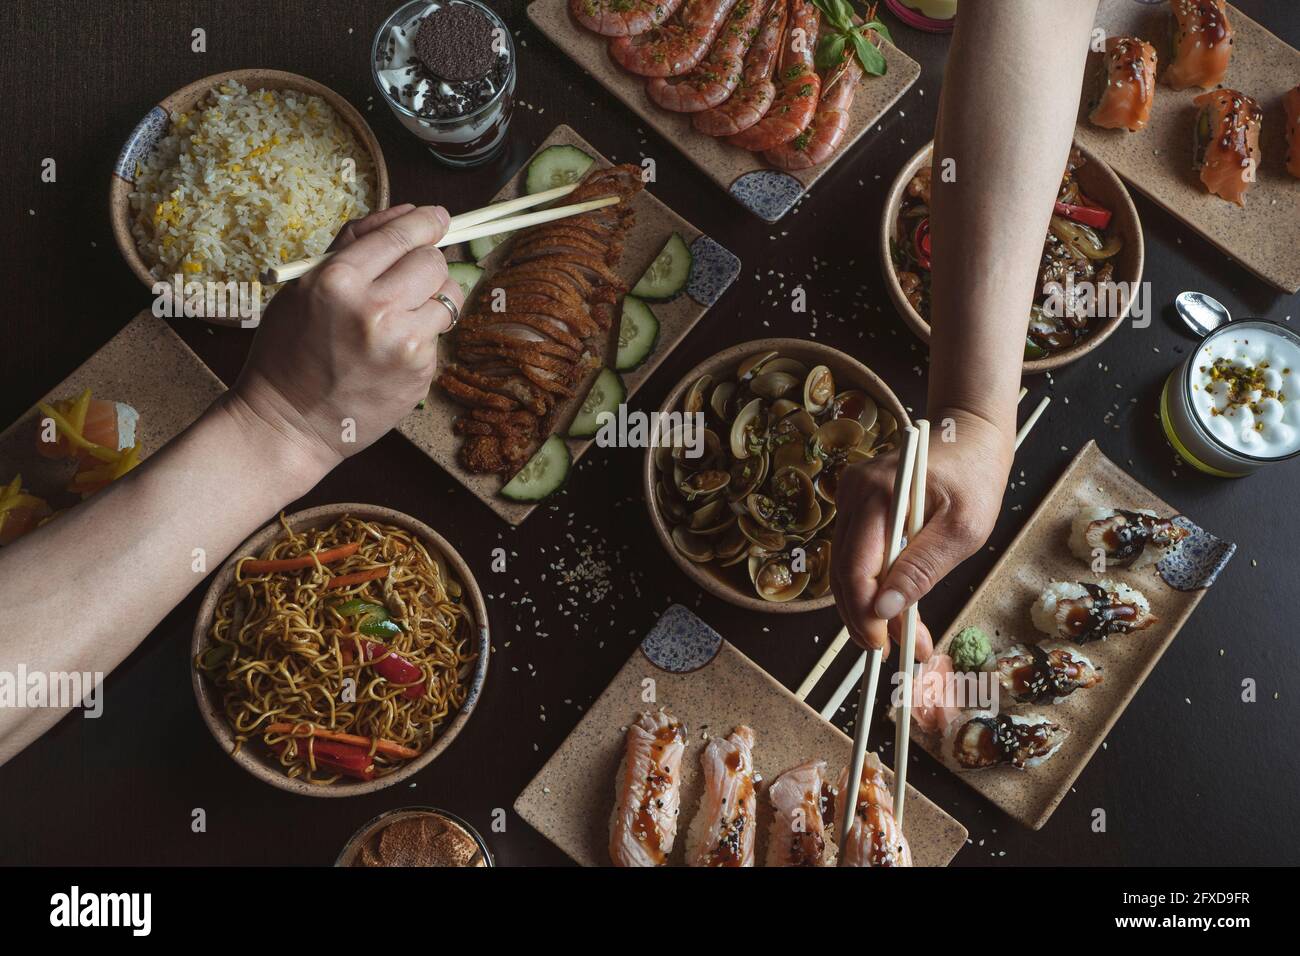 eating with chopsticks at the Japanese restaurant table Stock Photo